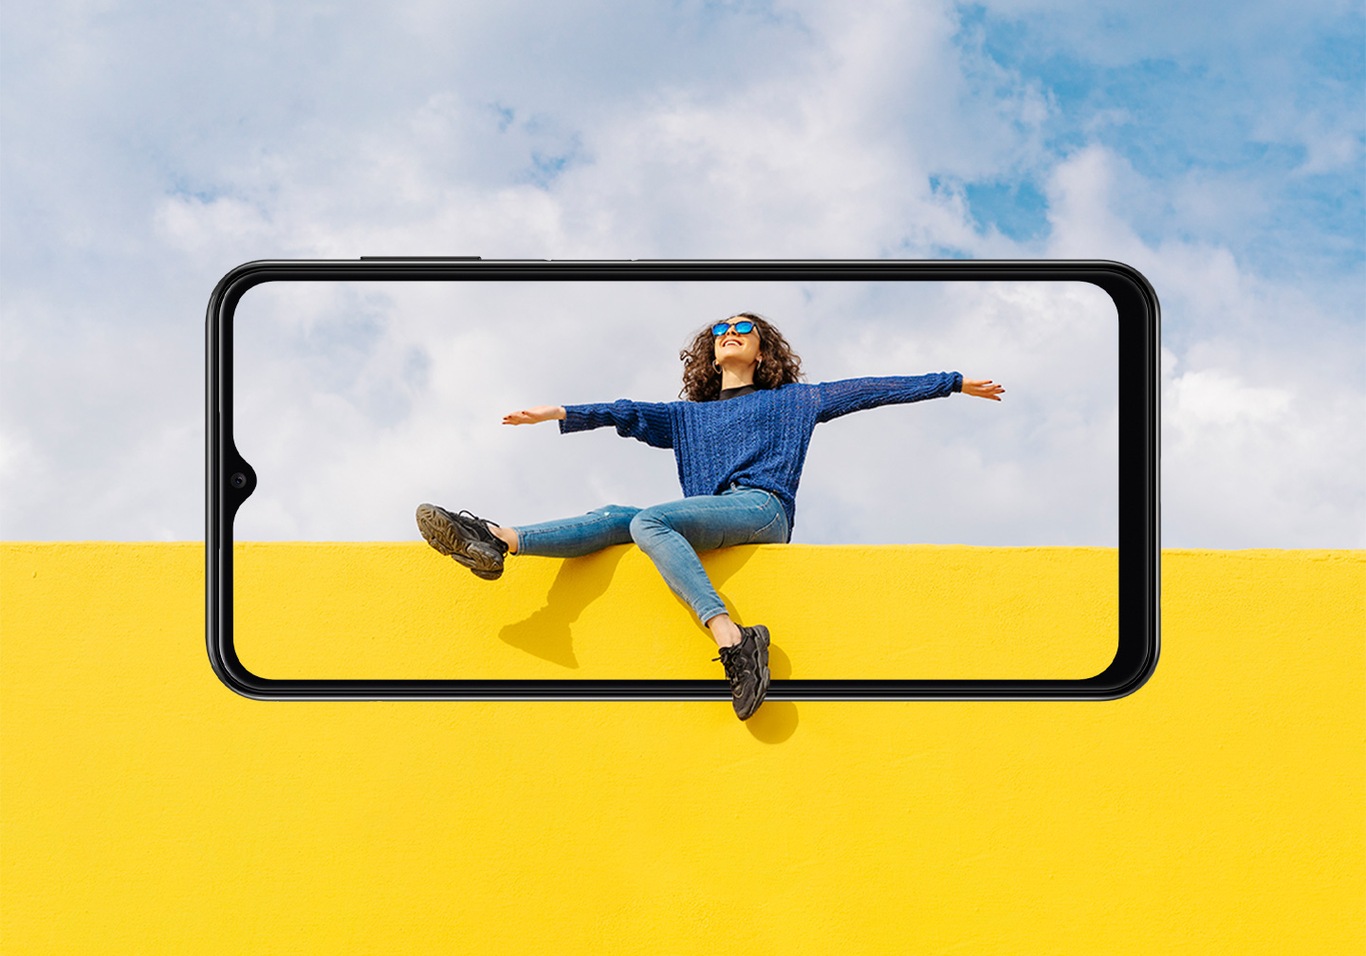 See Samsung Galaxy A13 specs, features, and release date. Read Samsung Galaxy A13 reviews and compare Samsung Galaxy A13 with other models. Galaxy A13 seen from the front. A young woman sitting on yellow wall against cloudy sky looking up